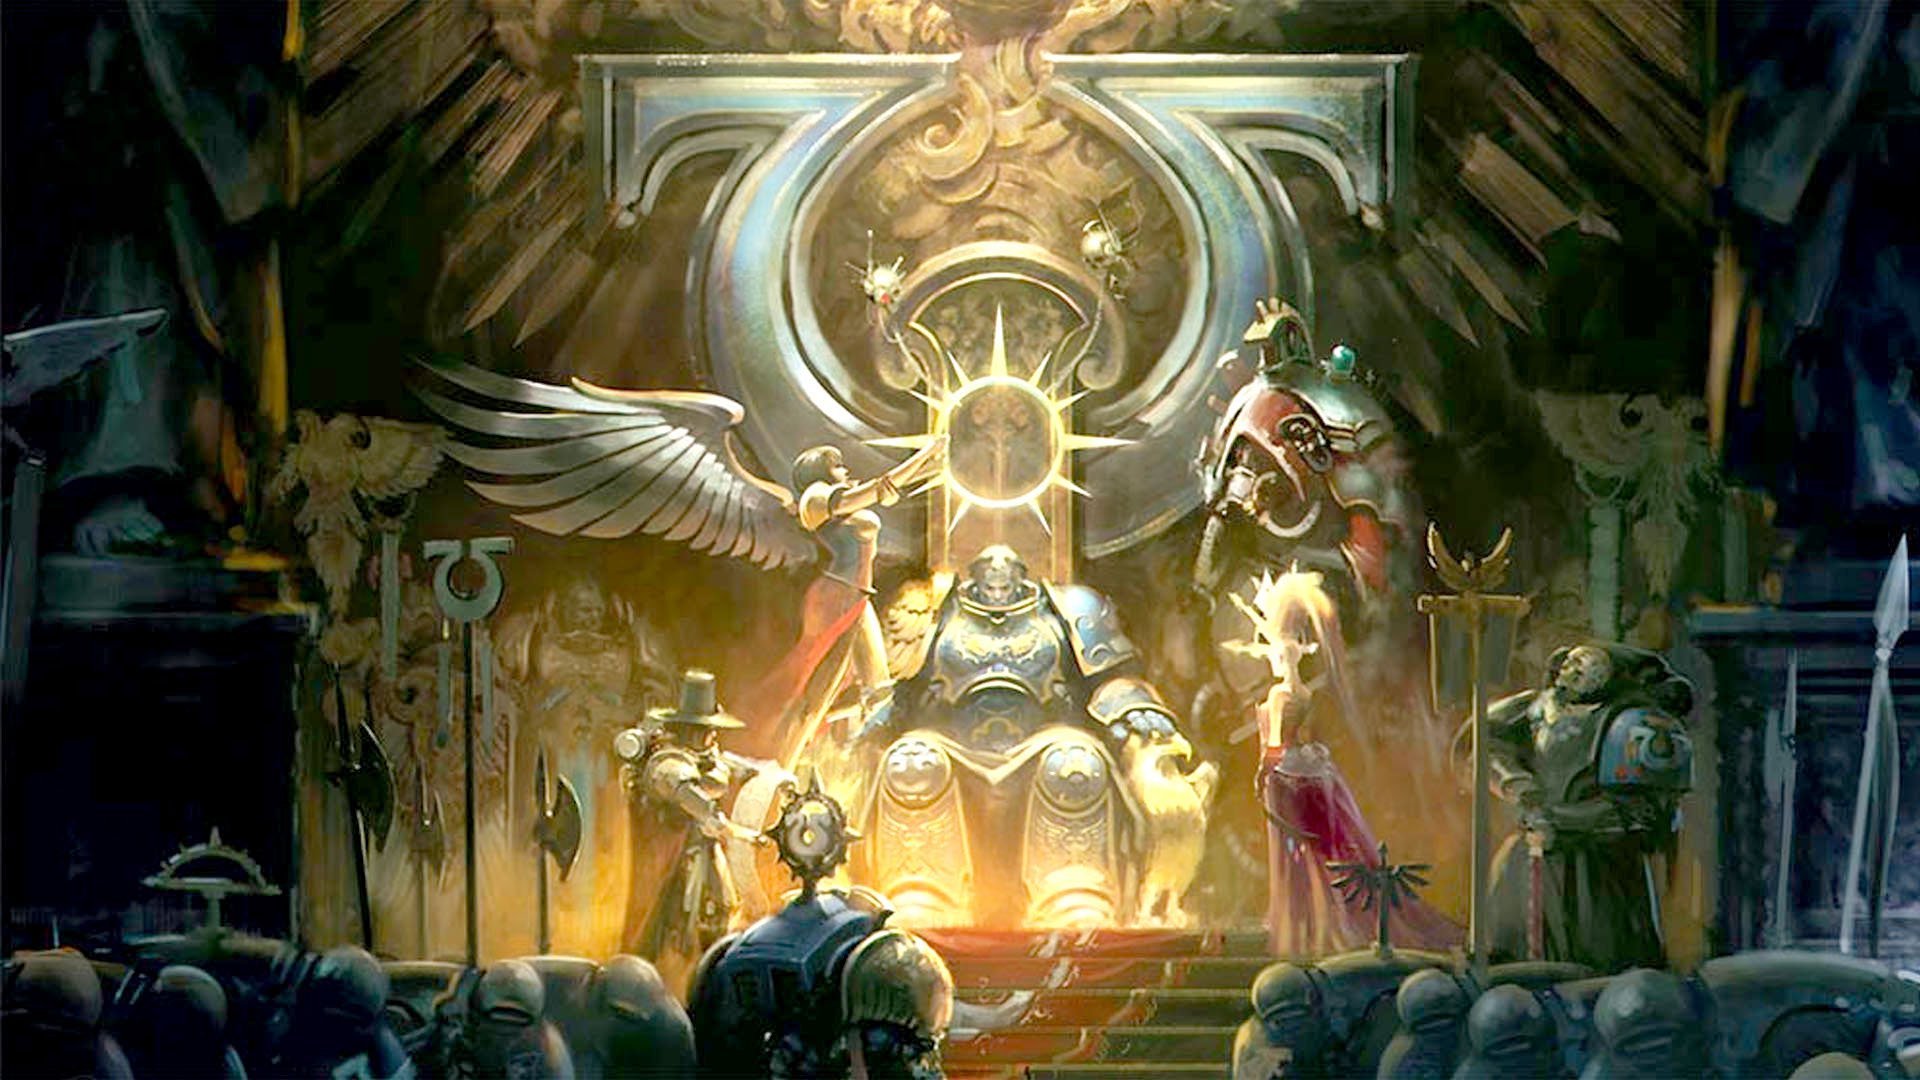 Warhammer 40k Emperor of Mankind guide - Games Workshop artwork showing Roboute Guilliman in the Armour of Fate